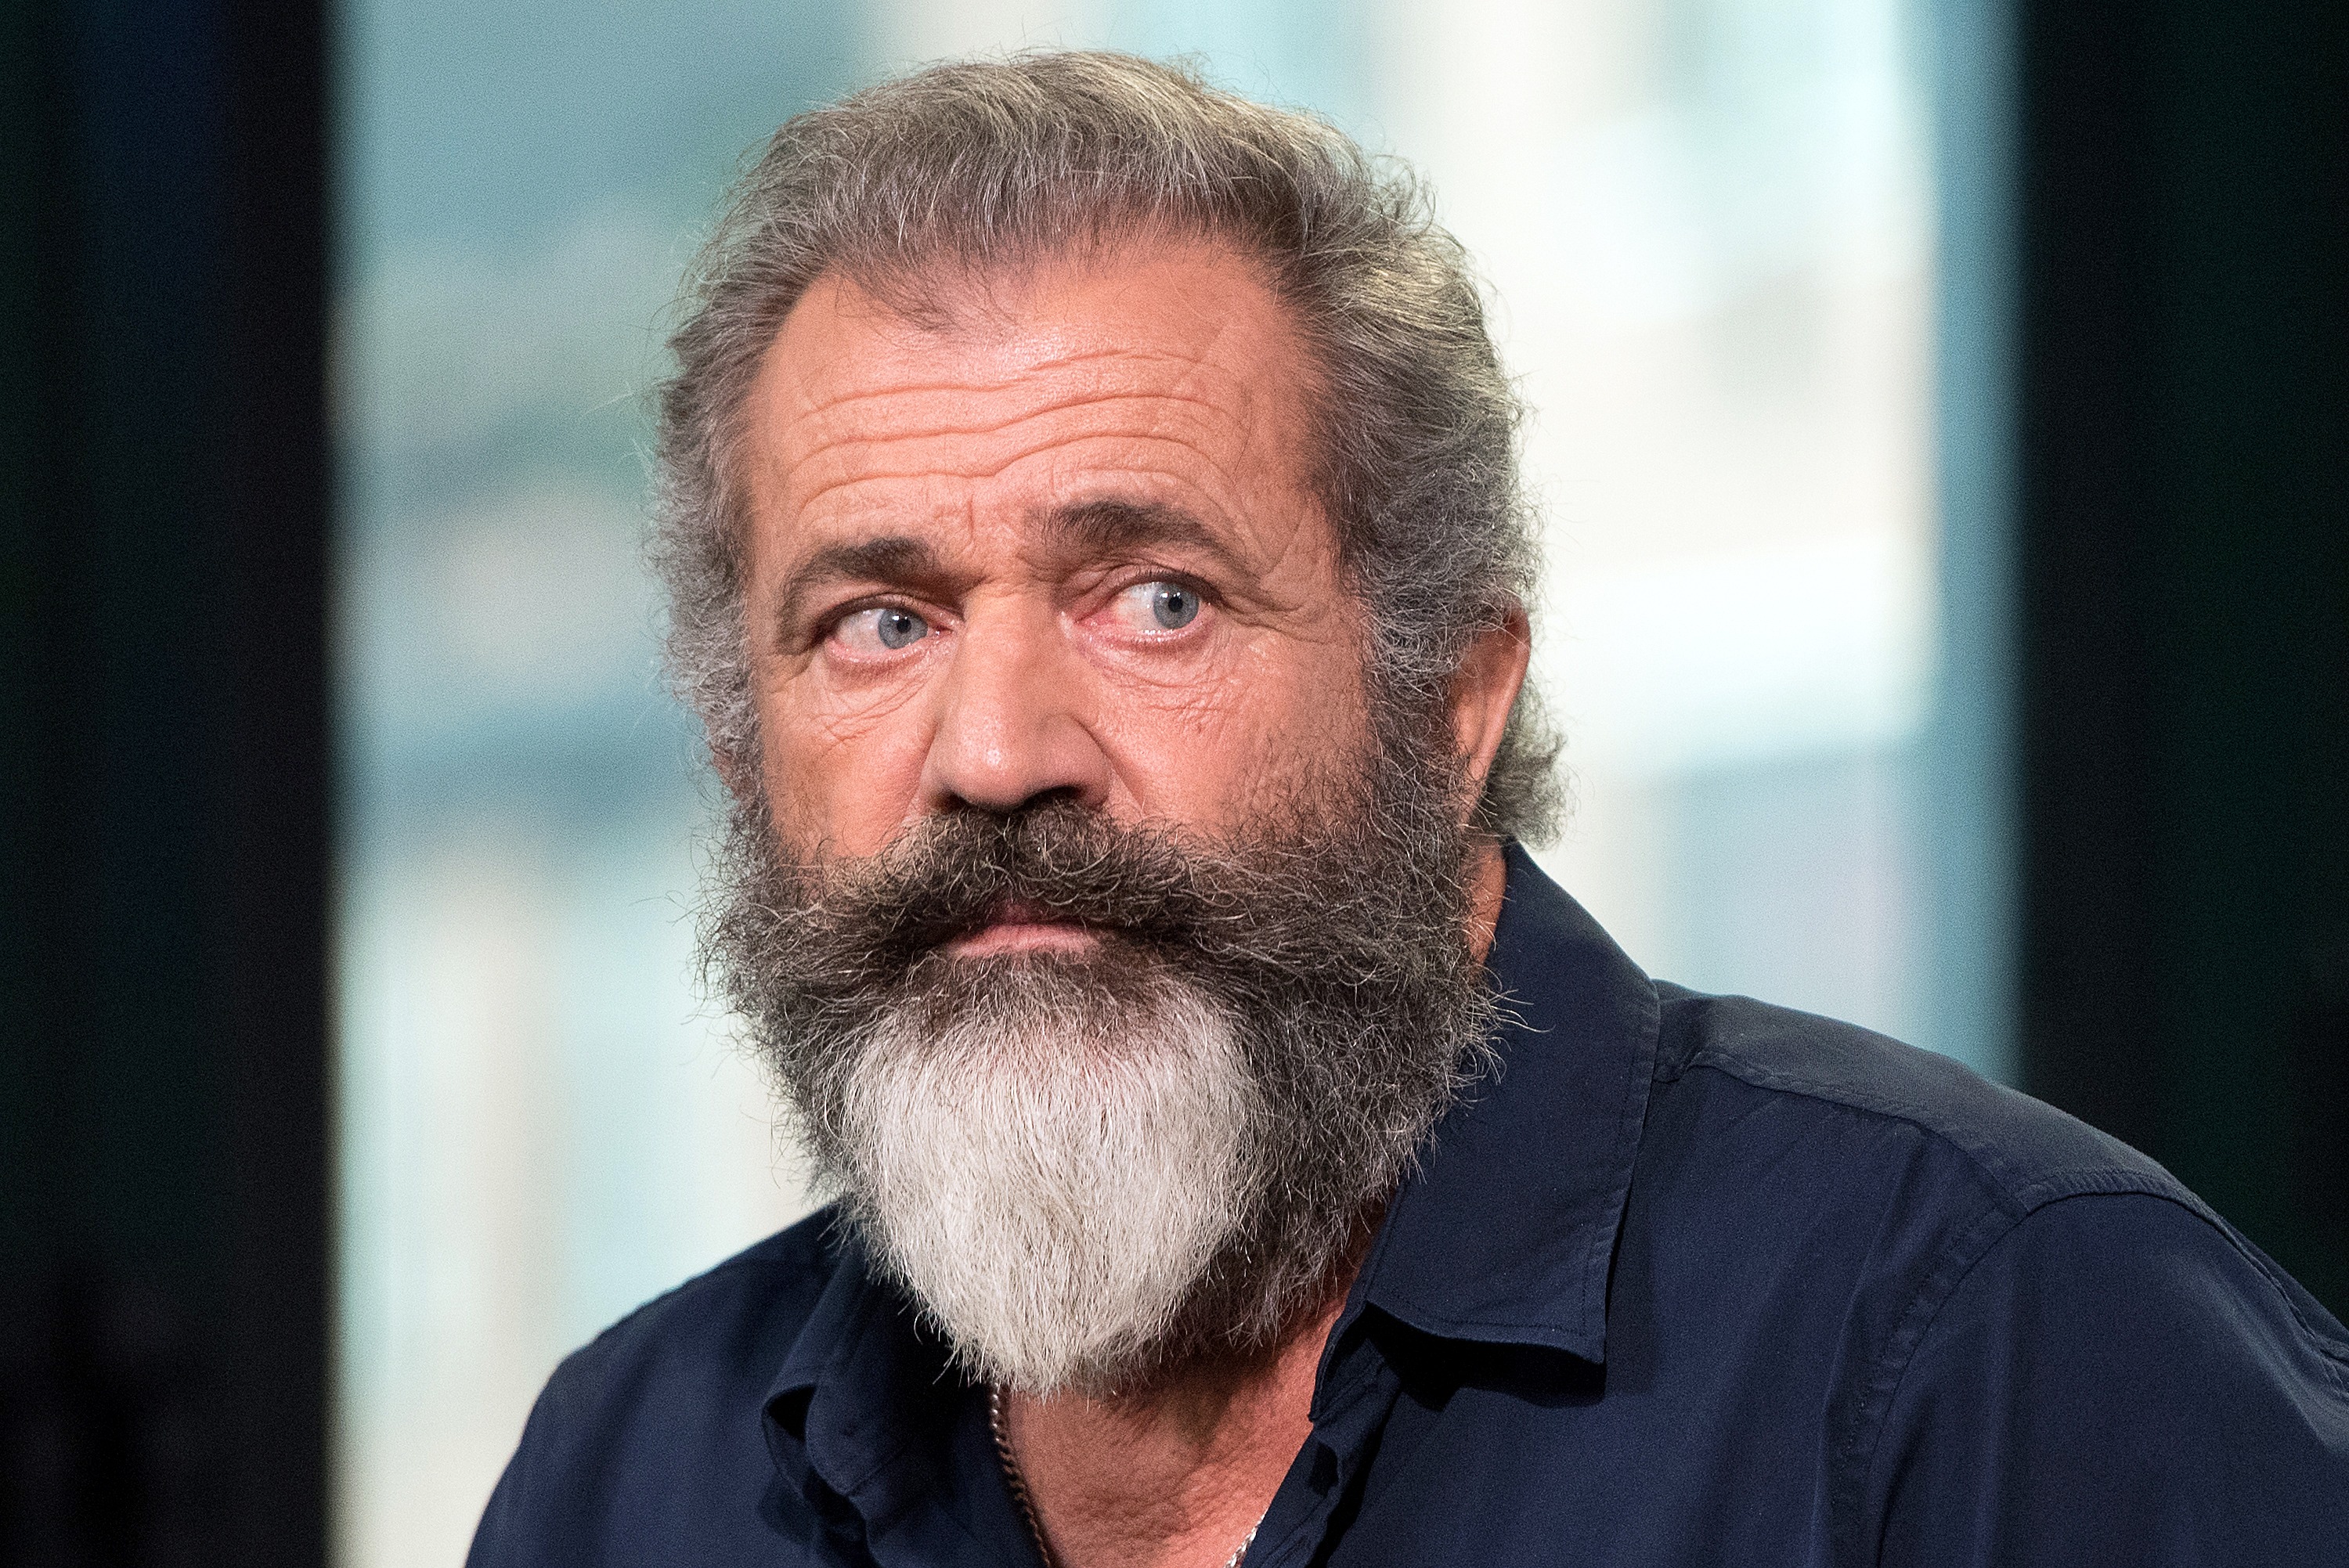 Mel Gibson attends the Build Series to discuss "Hacksaw Ridge" at AOL HQ on November 2, 2016, in New York City. | Source: Getty Images